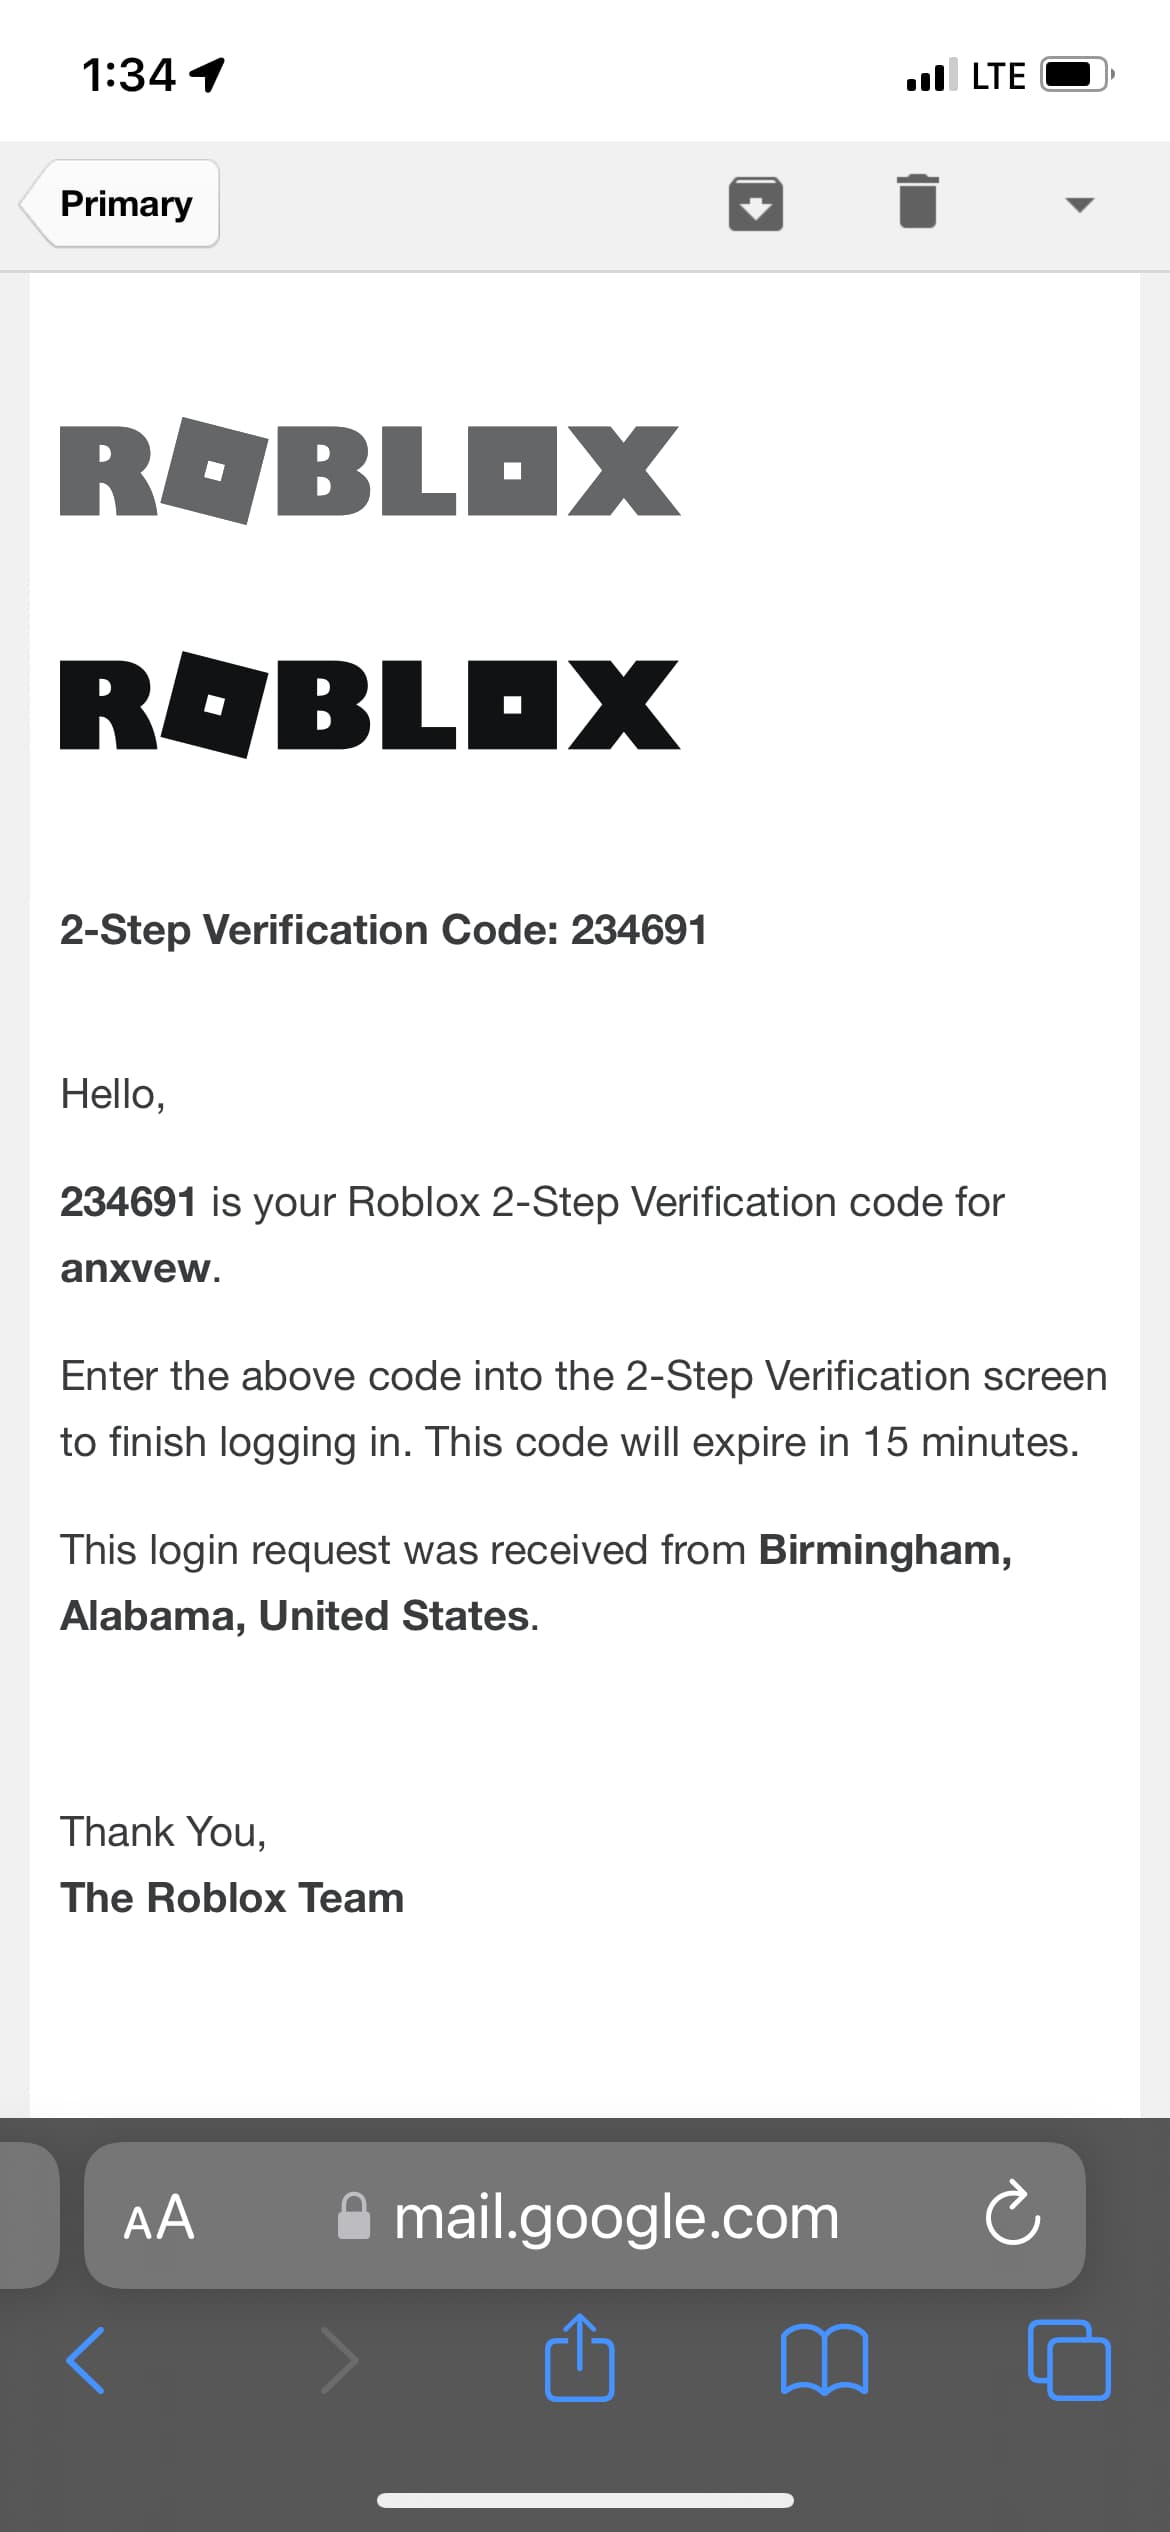 If my device got hacked, would my Roblox account logged in on that